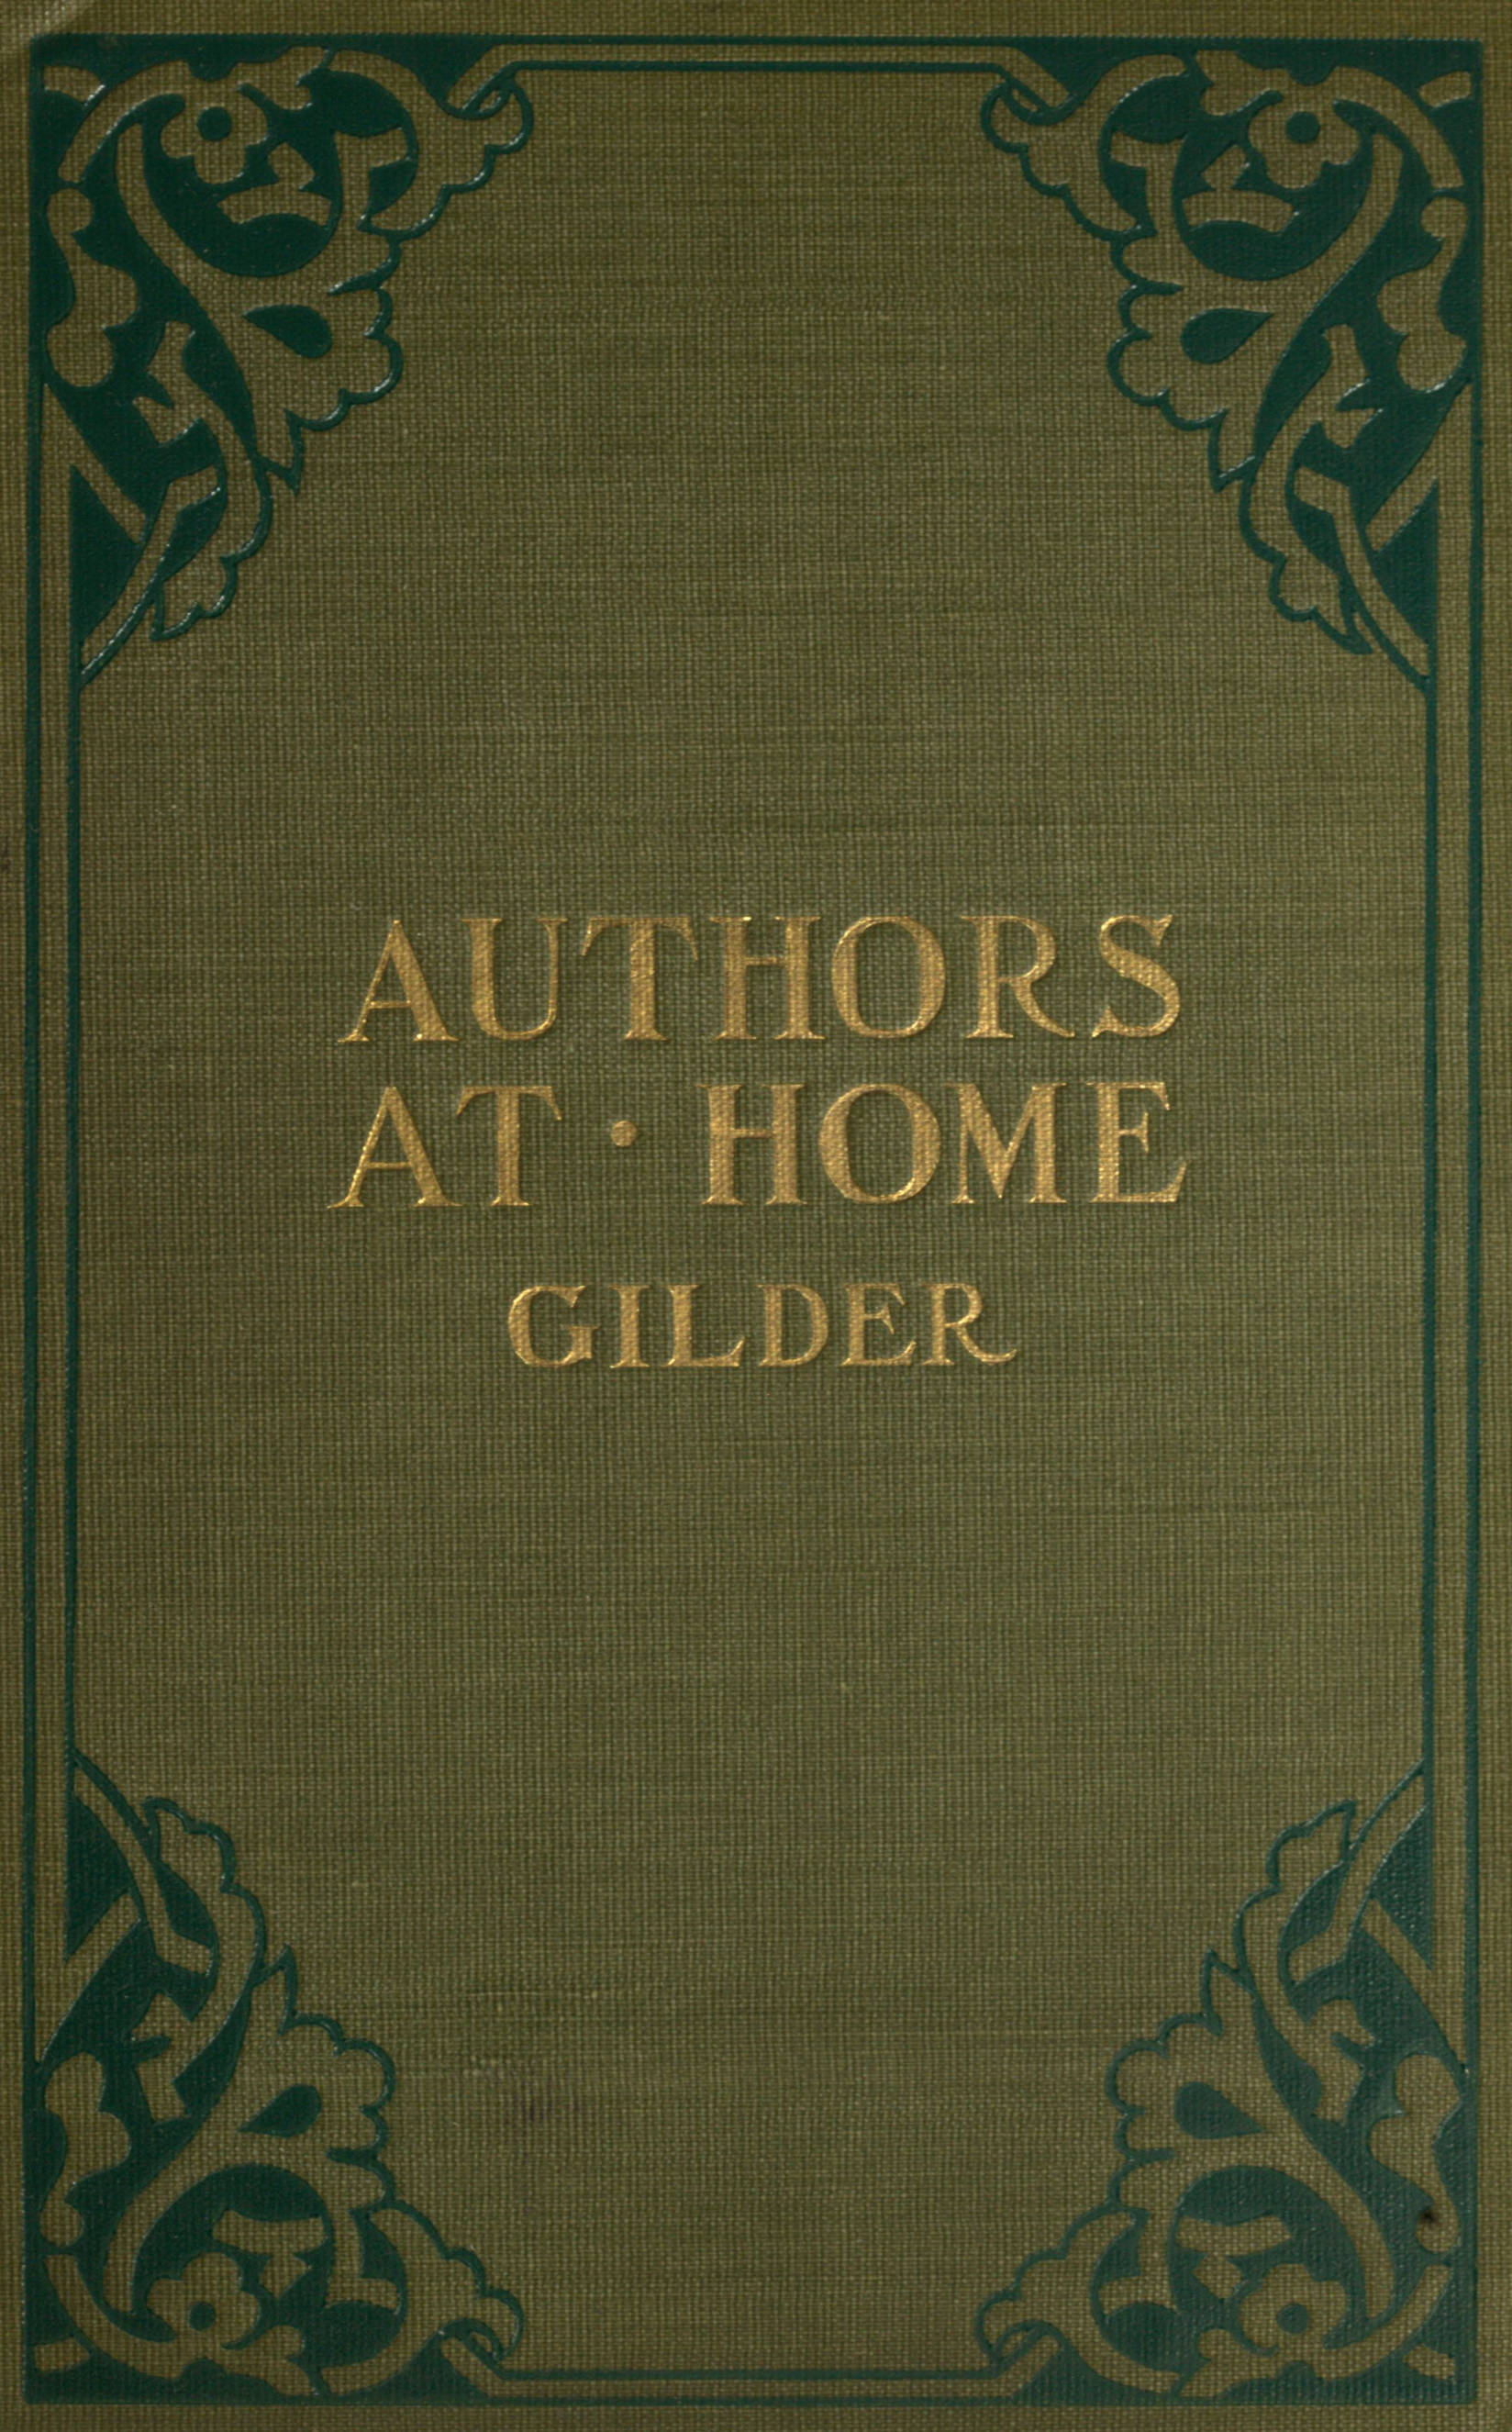 Authors at home: Personal and biographical sketches of well-known American writers